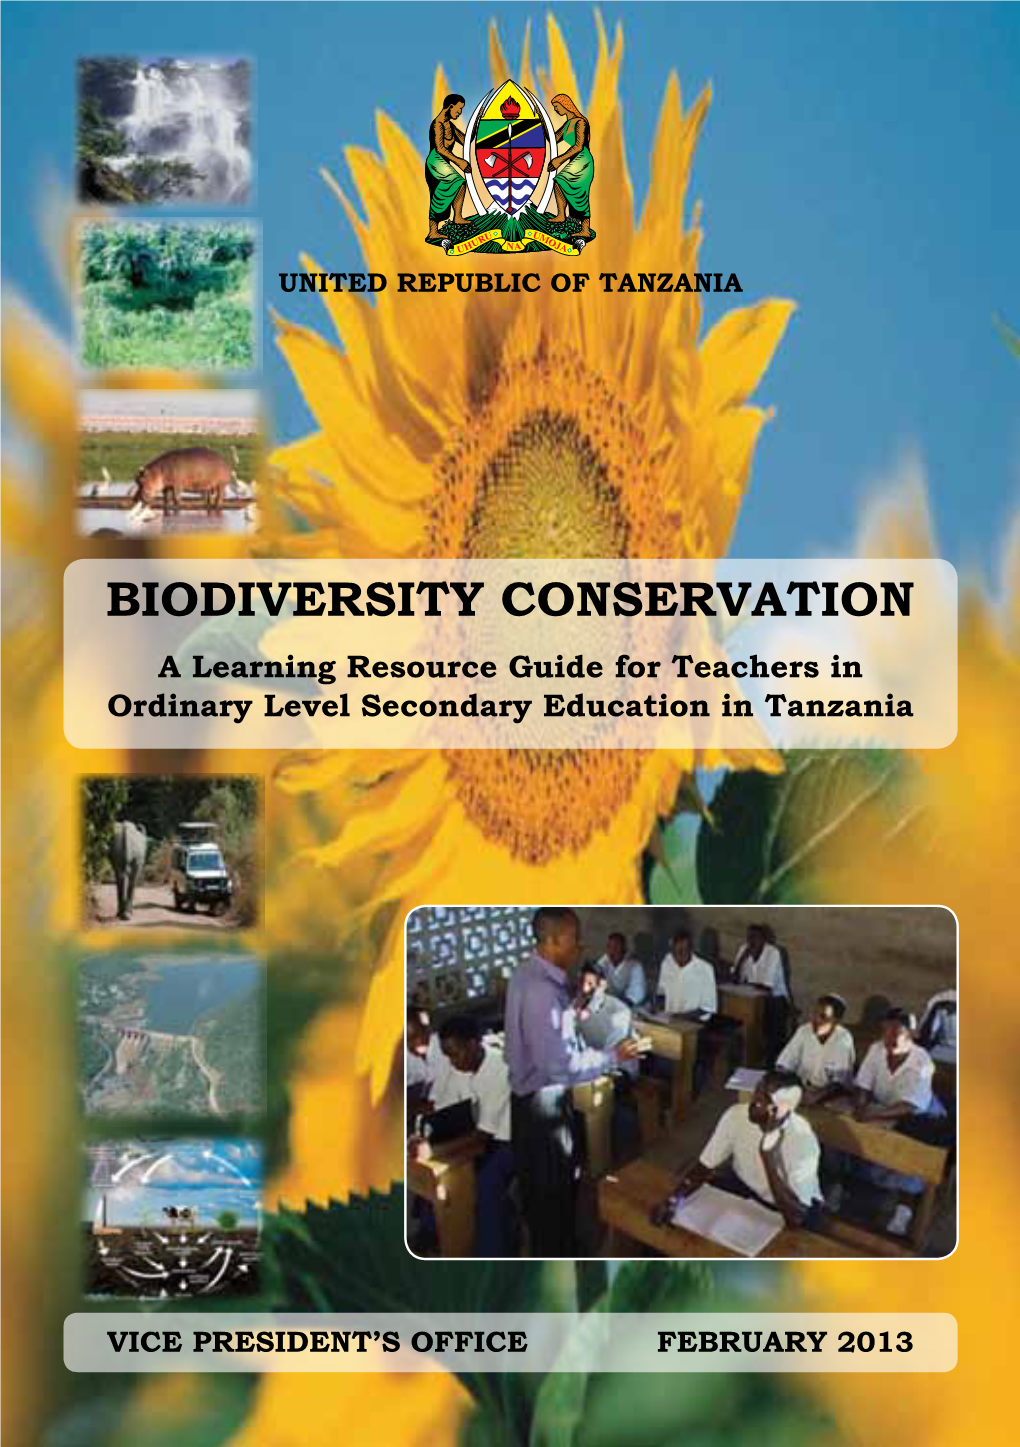 BIODIVERSITY CONSERVATION a Learning Resource Guide for Teachers in Ordinary Level Secondary Education in Tanzania